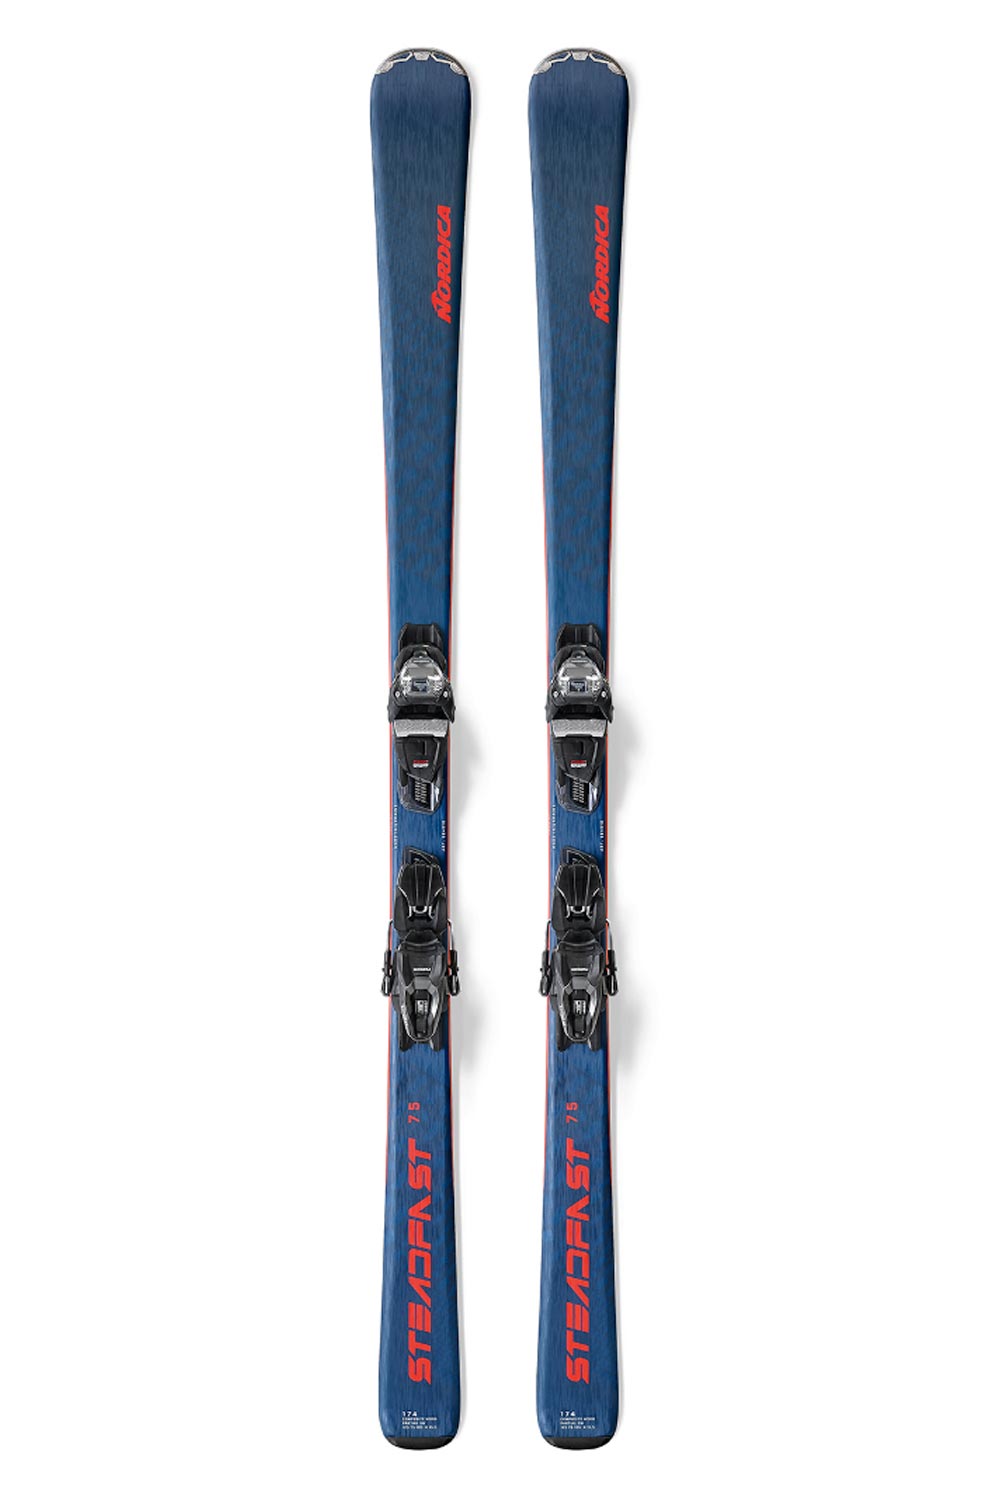 Nordica Steadfast 75 downhill skis with bindings,  blue skis, red accents, black bindings.